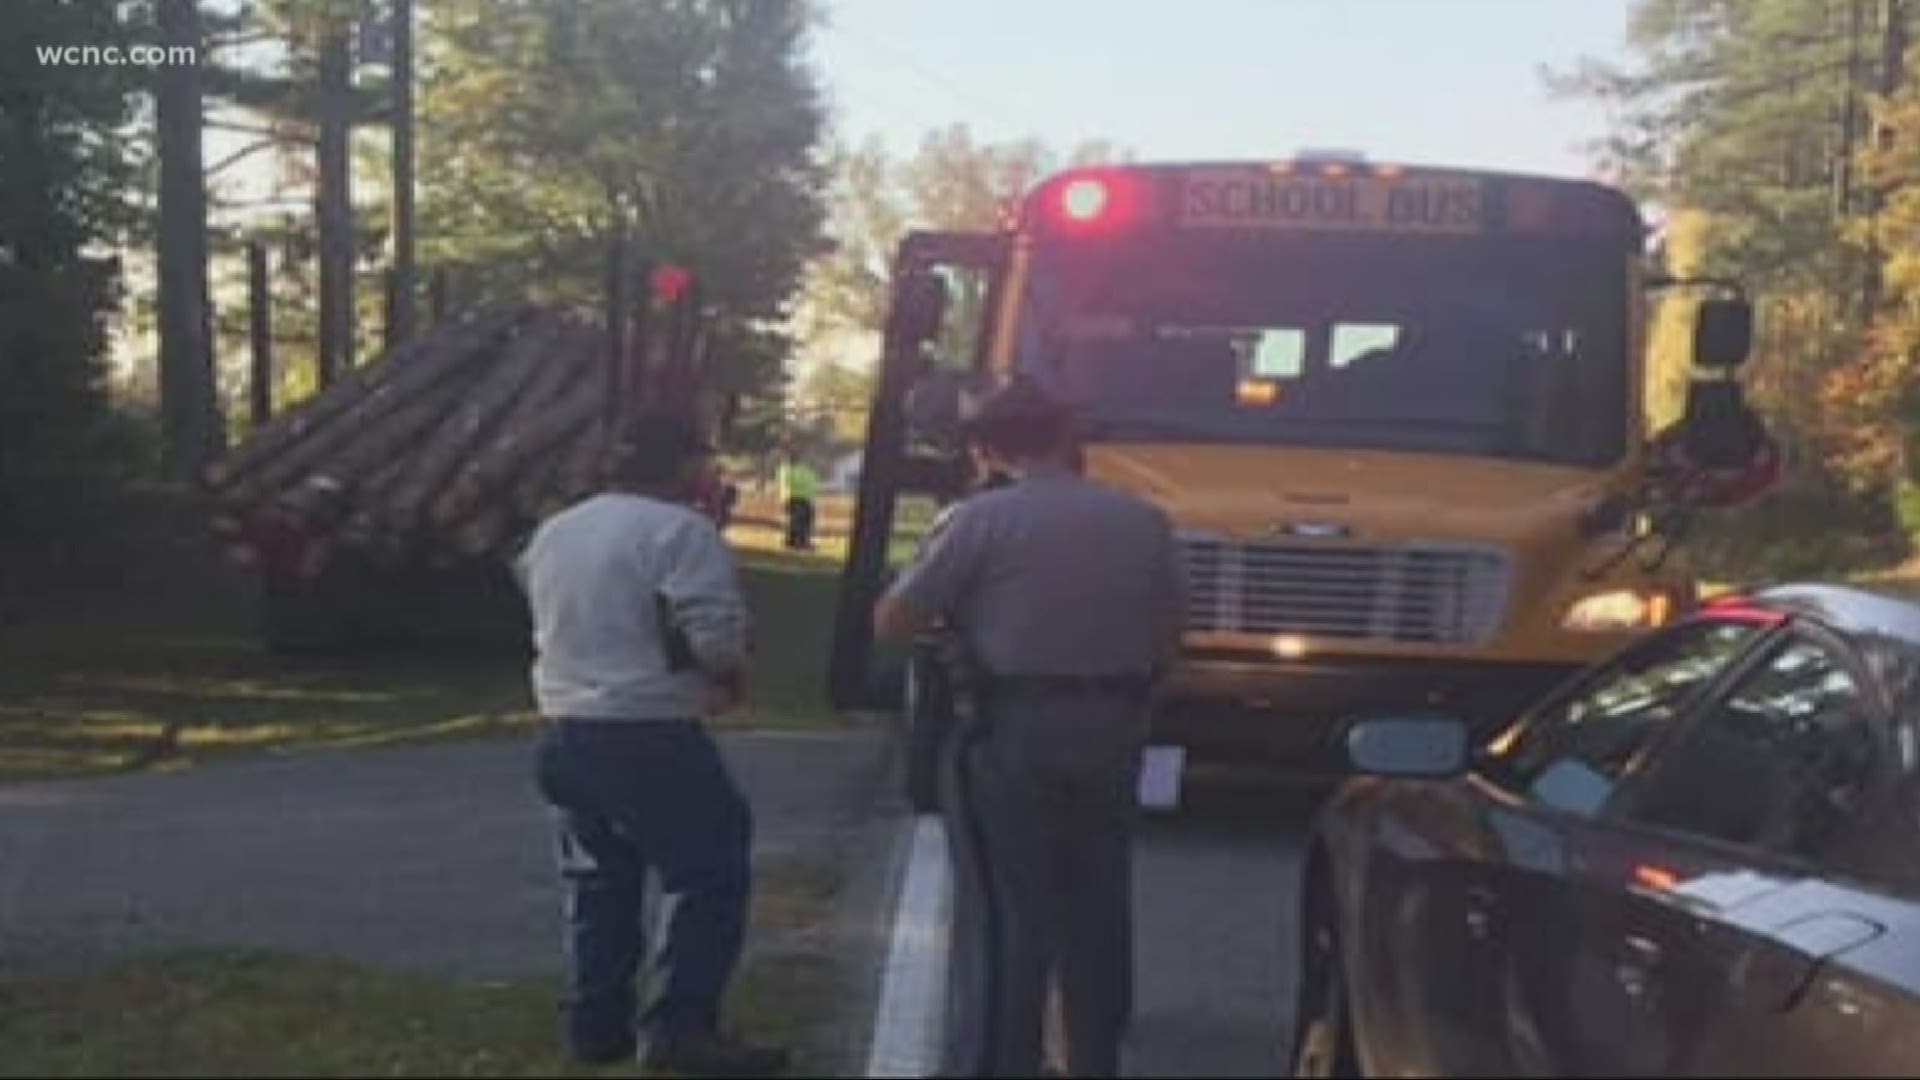 A Lancaster County student was getting on the school bus when a logging truck went flying by, nearly hitting her and the bus.